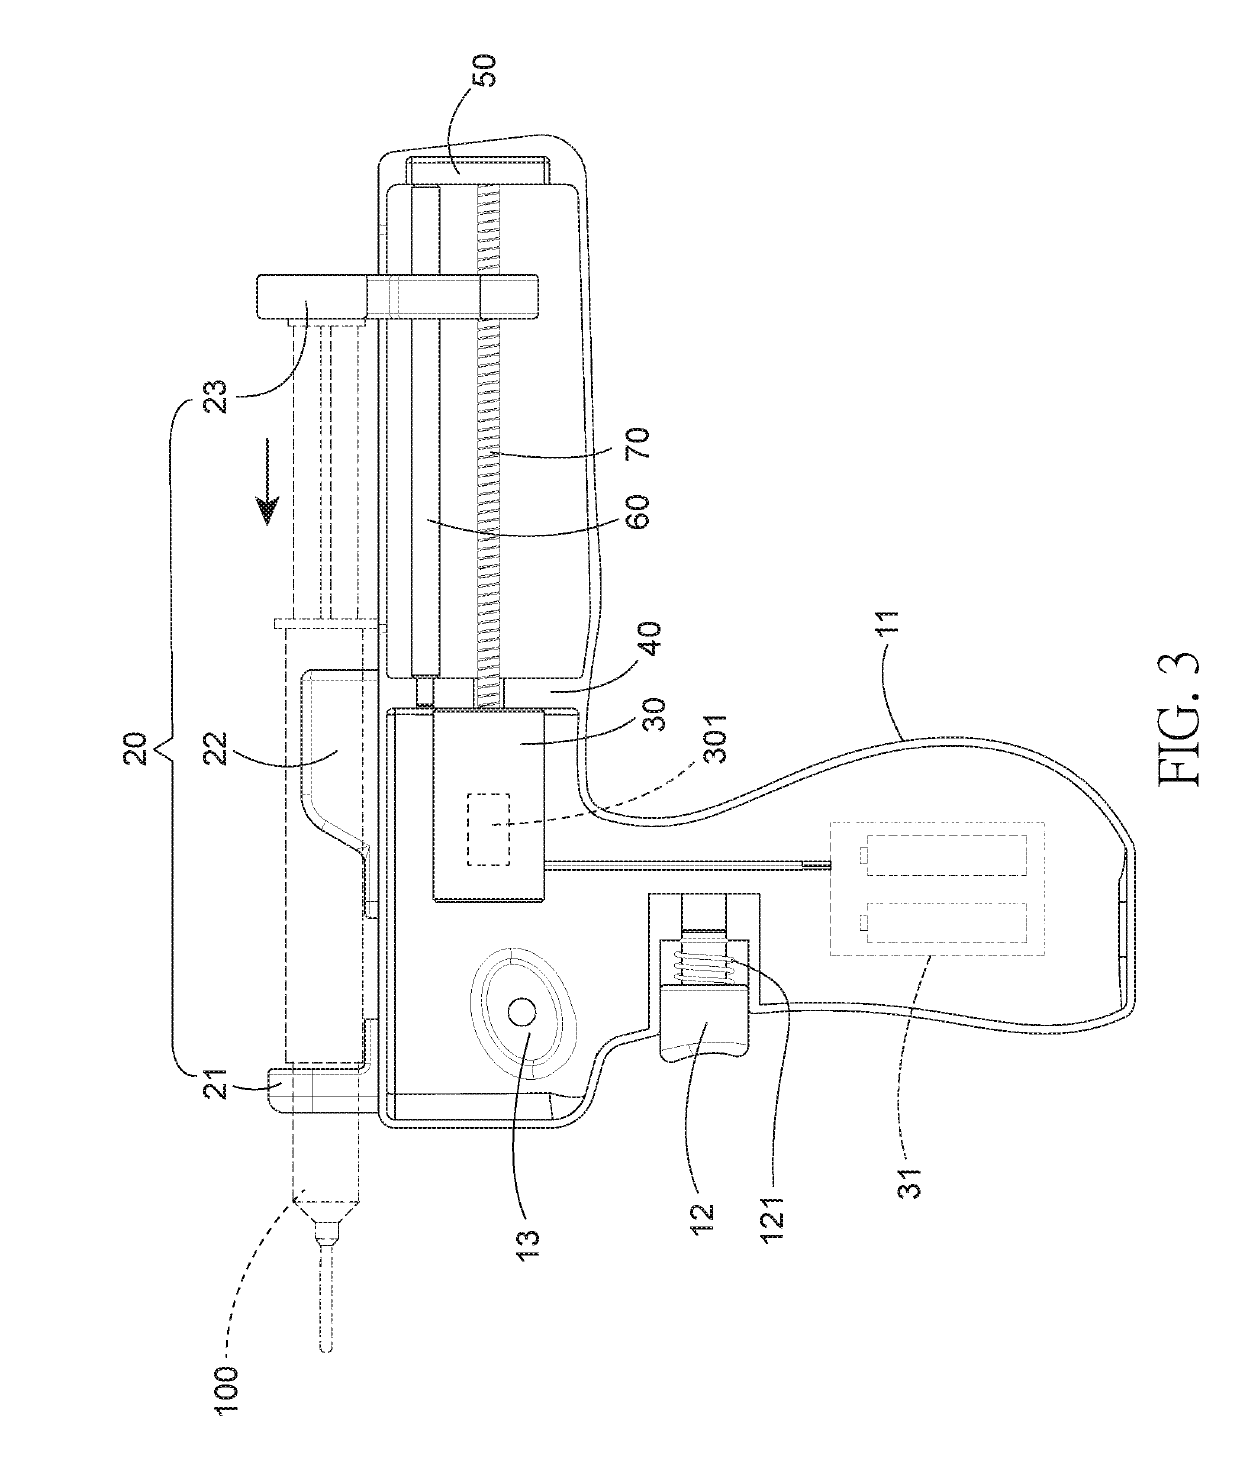 Automatic Jet Injector for Administering Tissue